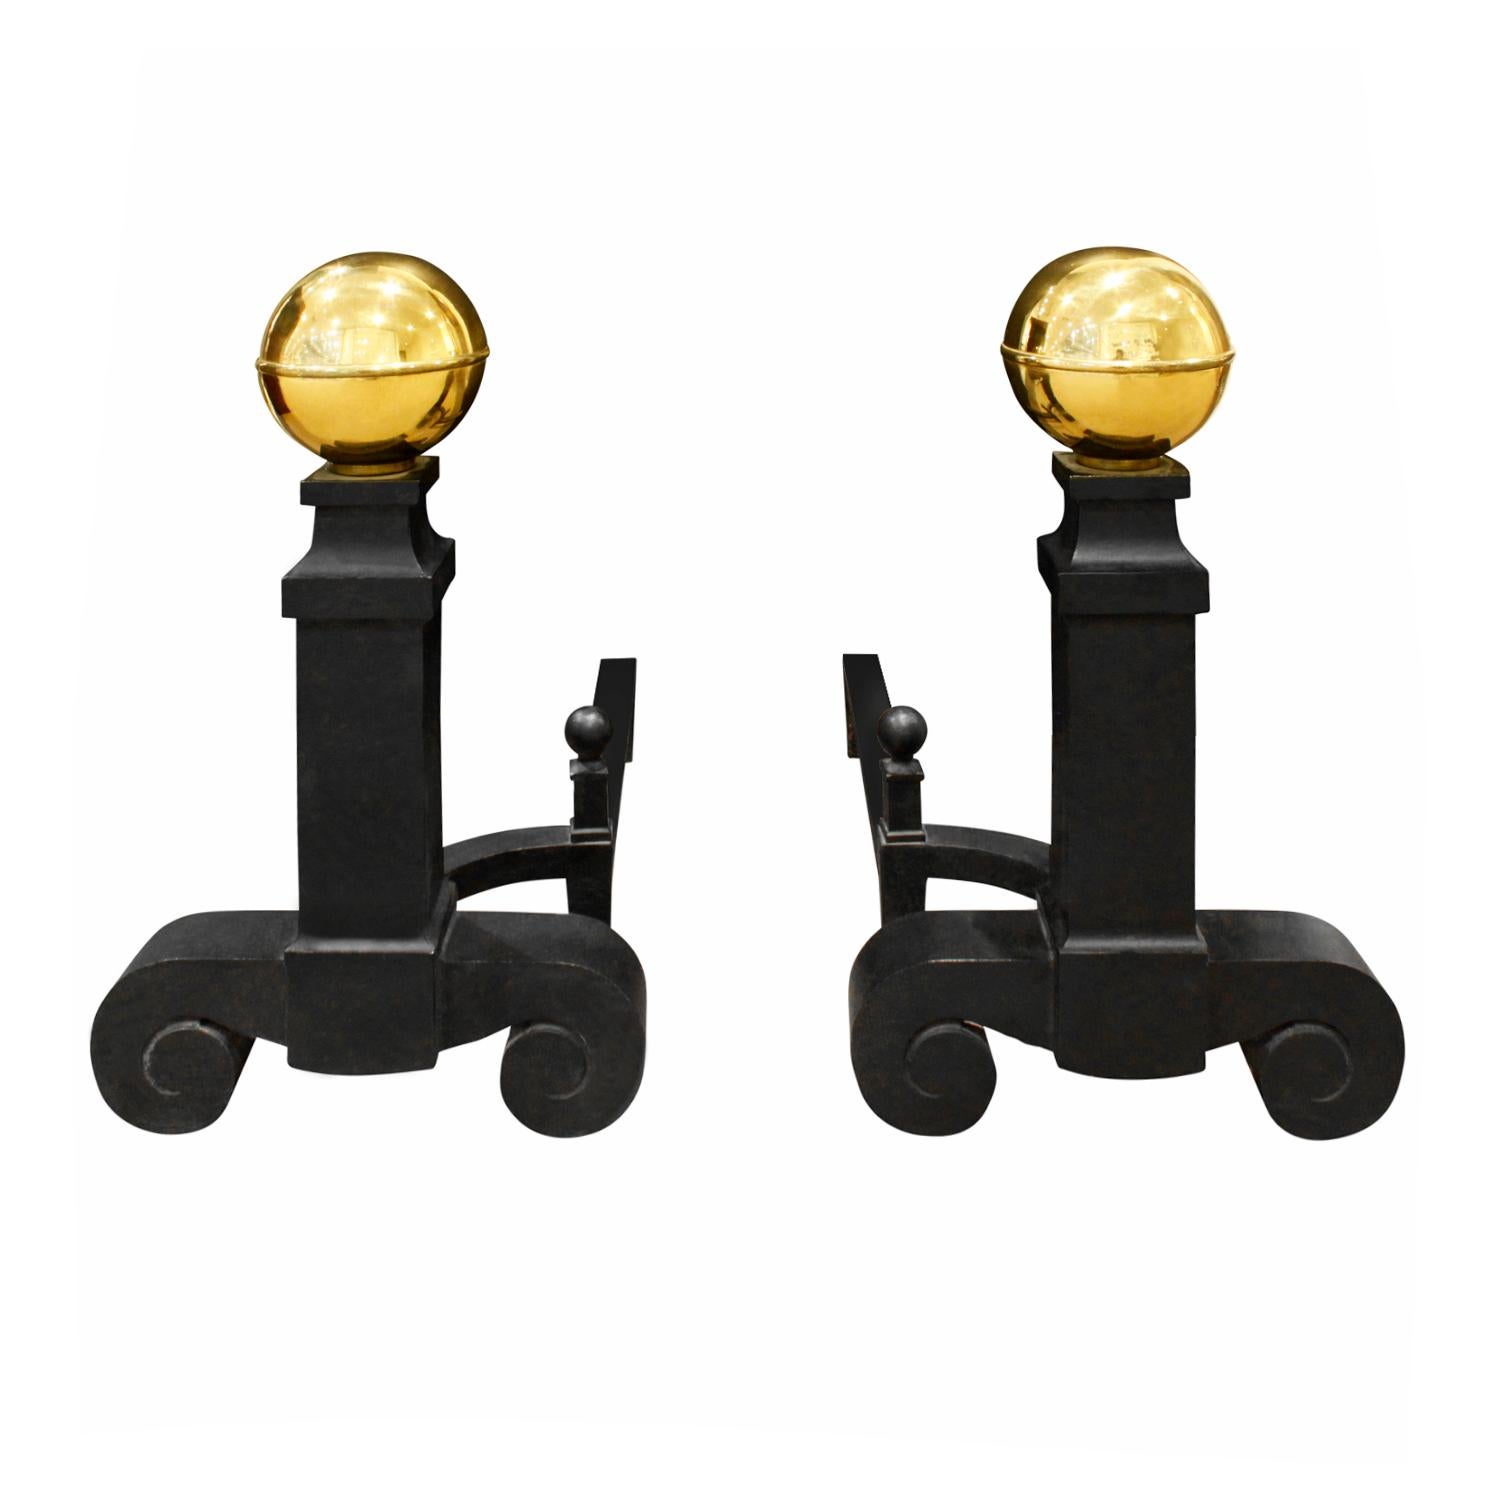 Pair of large andirons in wrought iron with brass orbs on top by Stover, American 1970's (signed “STOVER MFG. CO.” on base of andiron).   These andirons are beautifully made. Dimensions are for each.